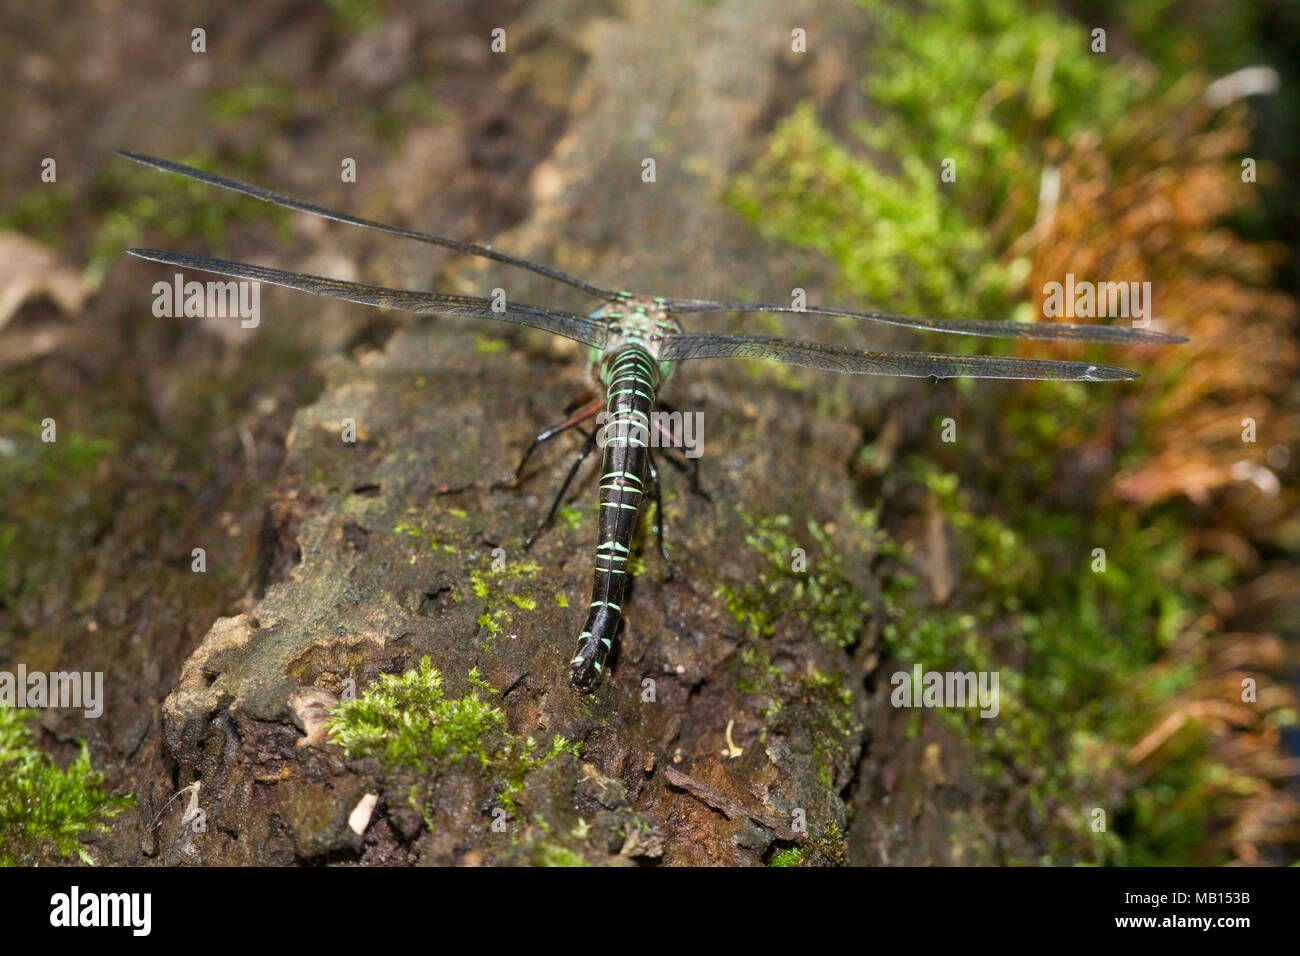 06370-00205 Swamp Darner (Epiaeschna heros) female ovipositing laying eggs on log in water, Marion Co., IL Stock Photo